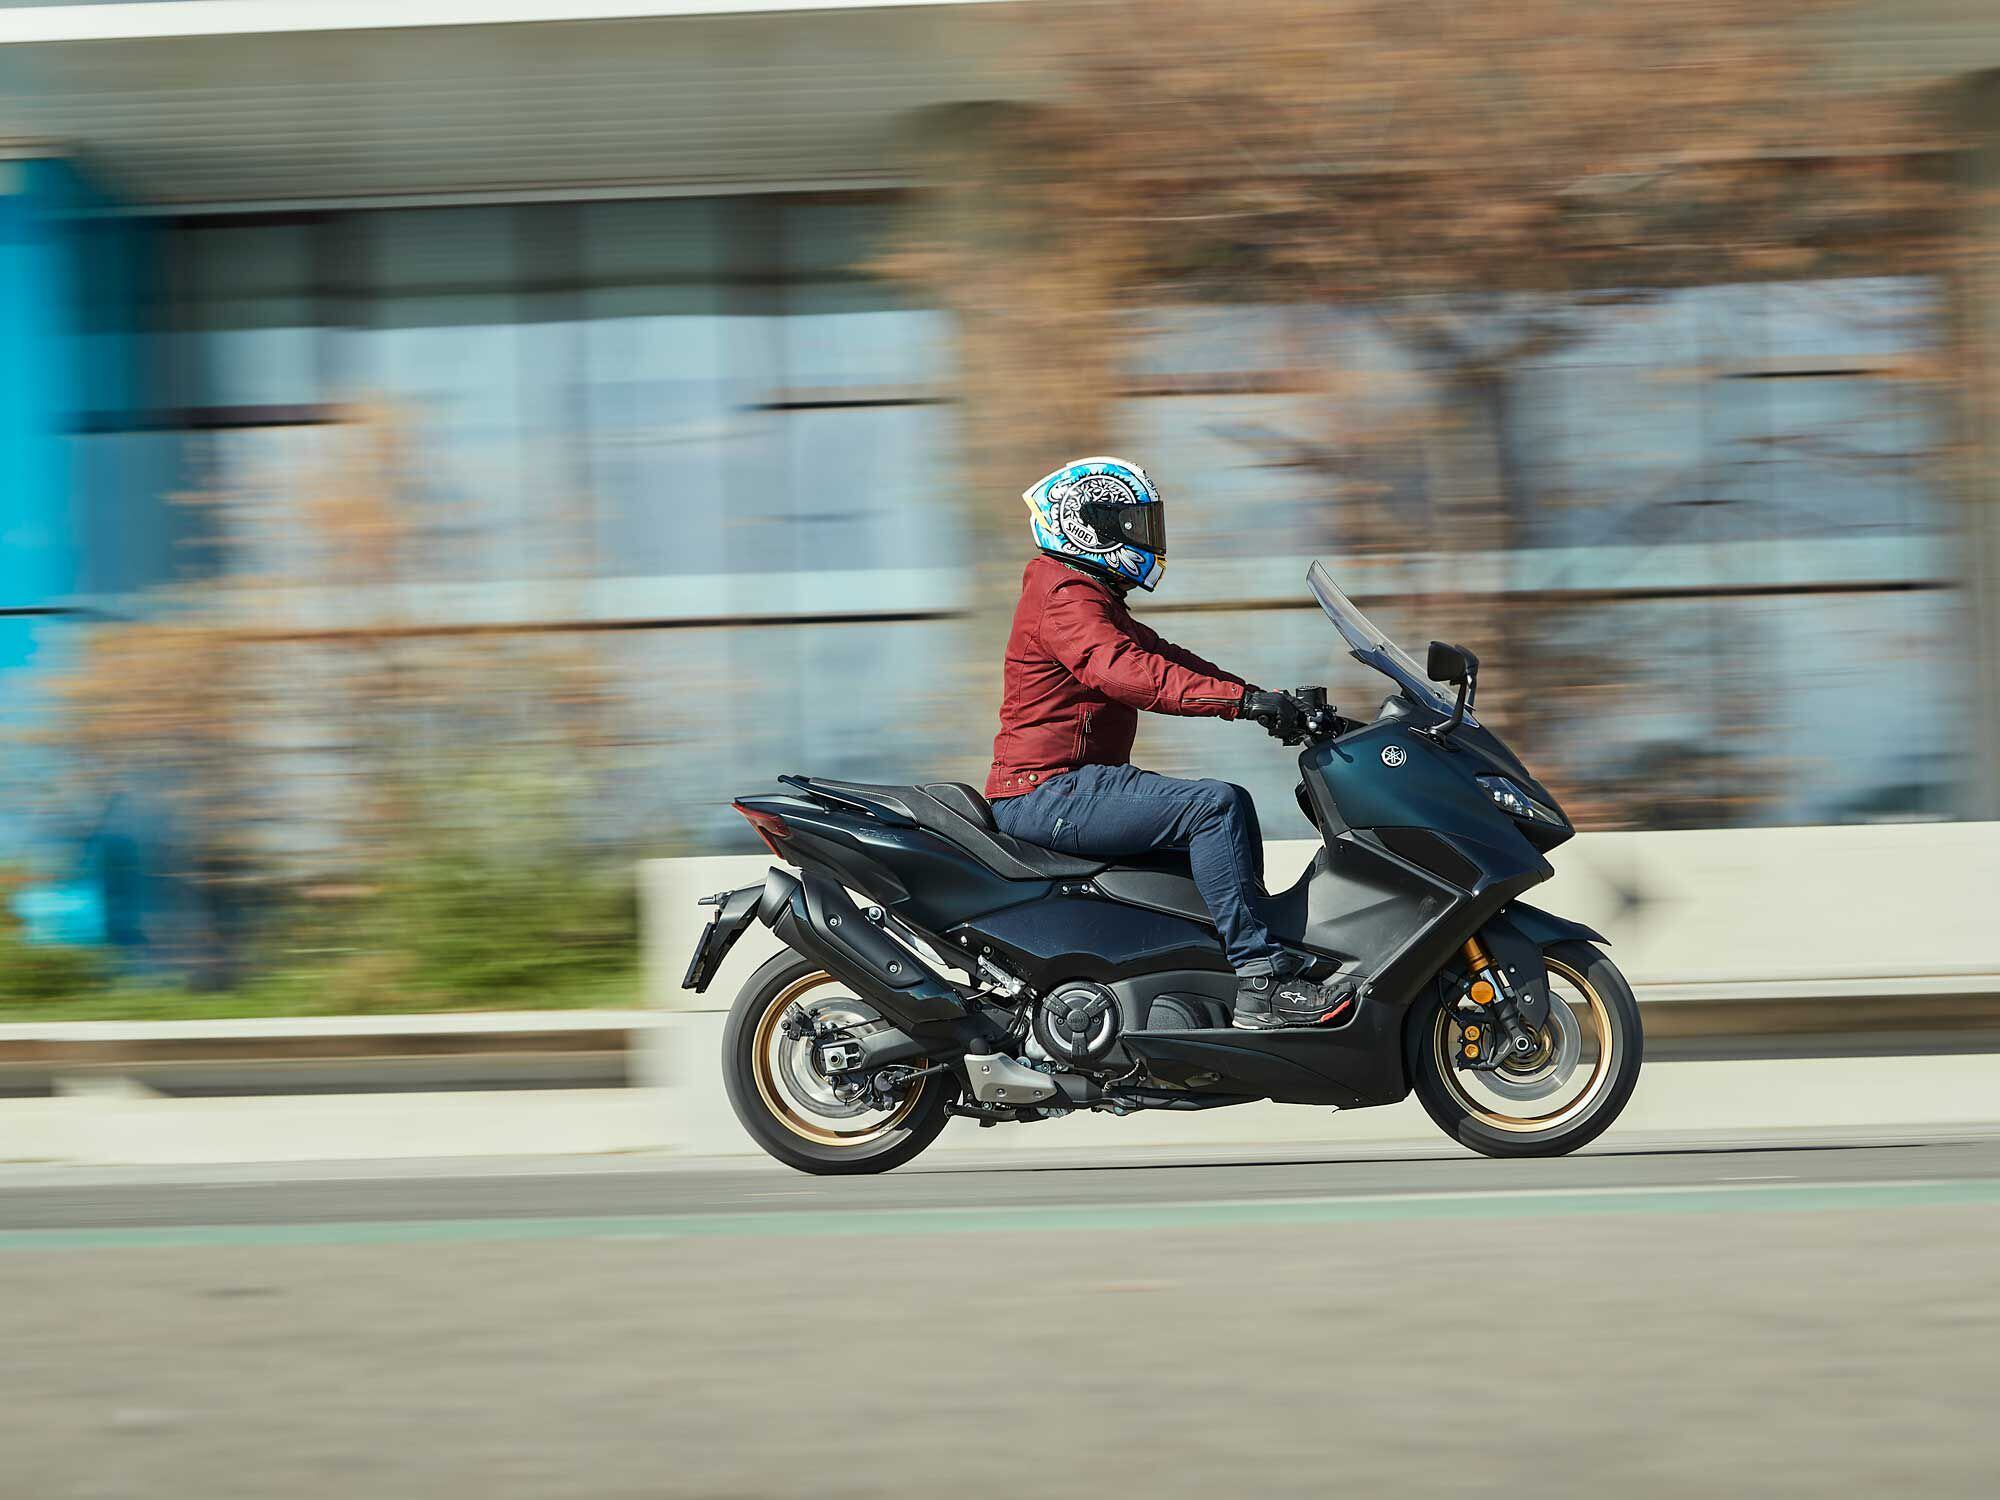 Yes, it was all the way back in 2001 when Yamaha launched the very first Yamaha TMAX maxi scooter.